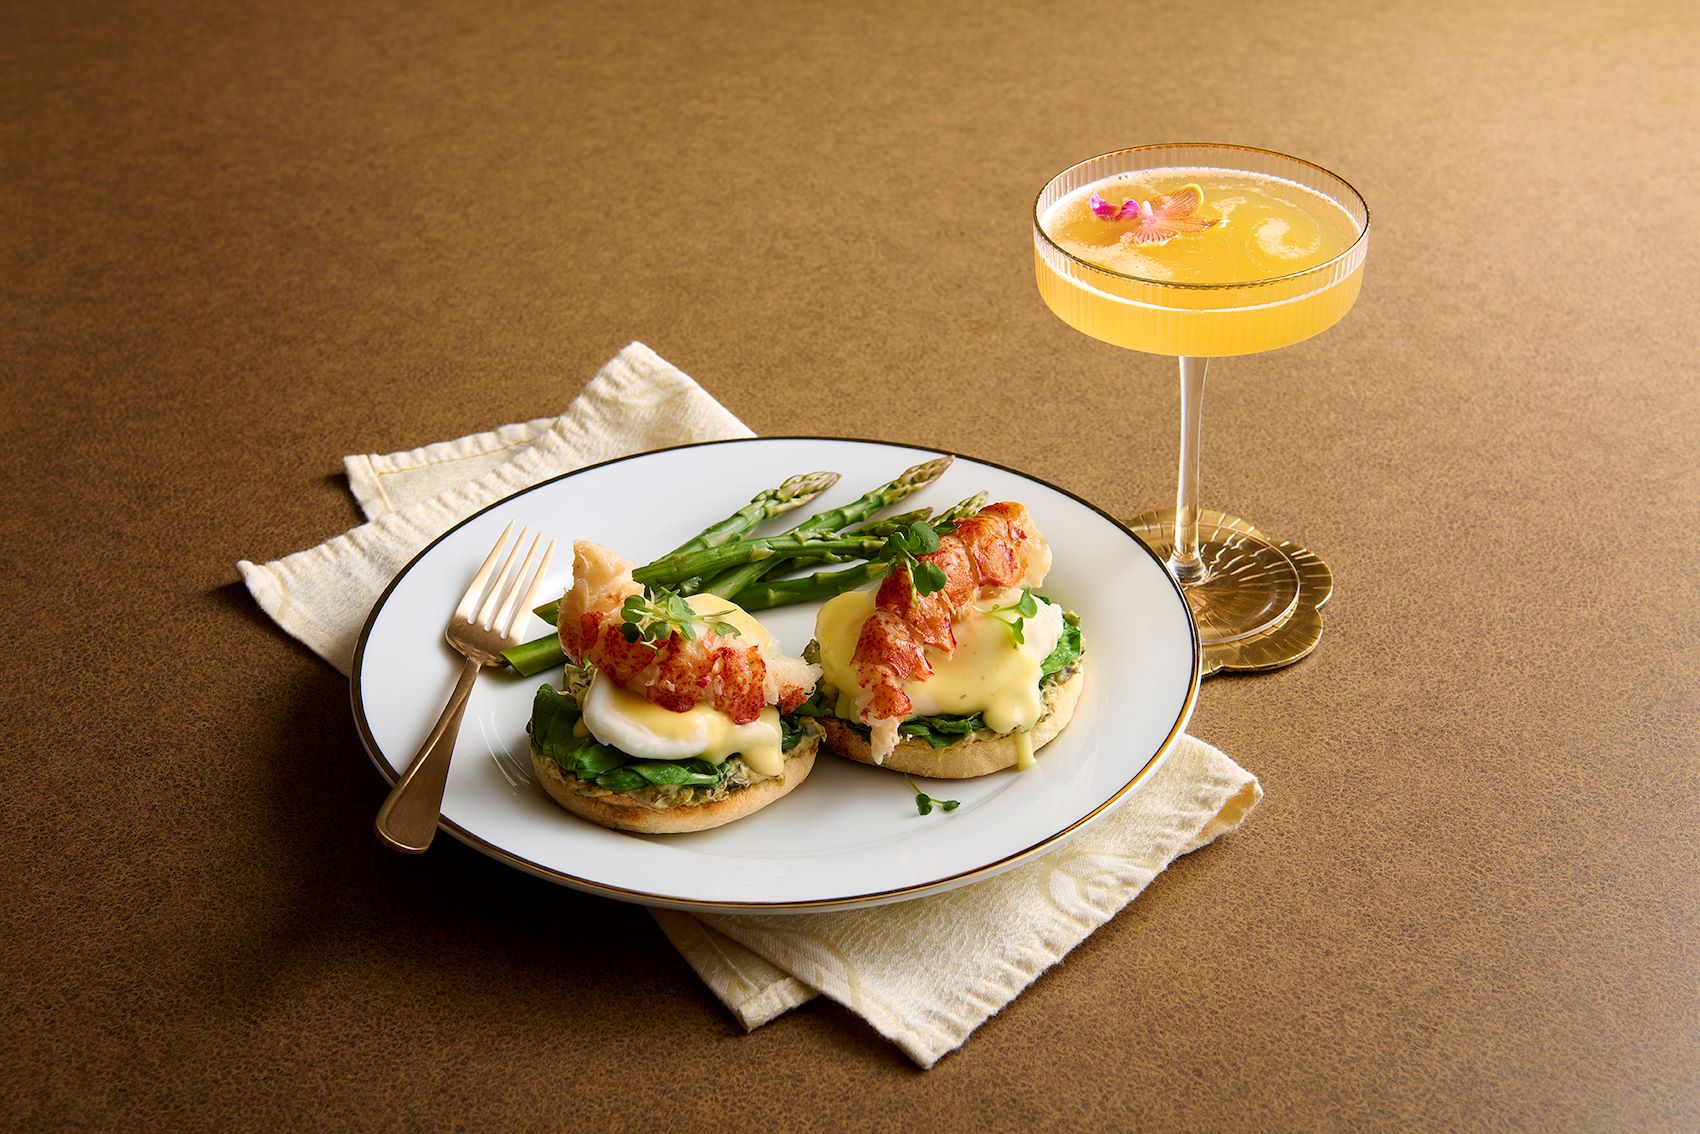 An image of the Lobster Benedict at the Palm.